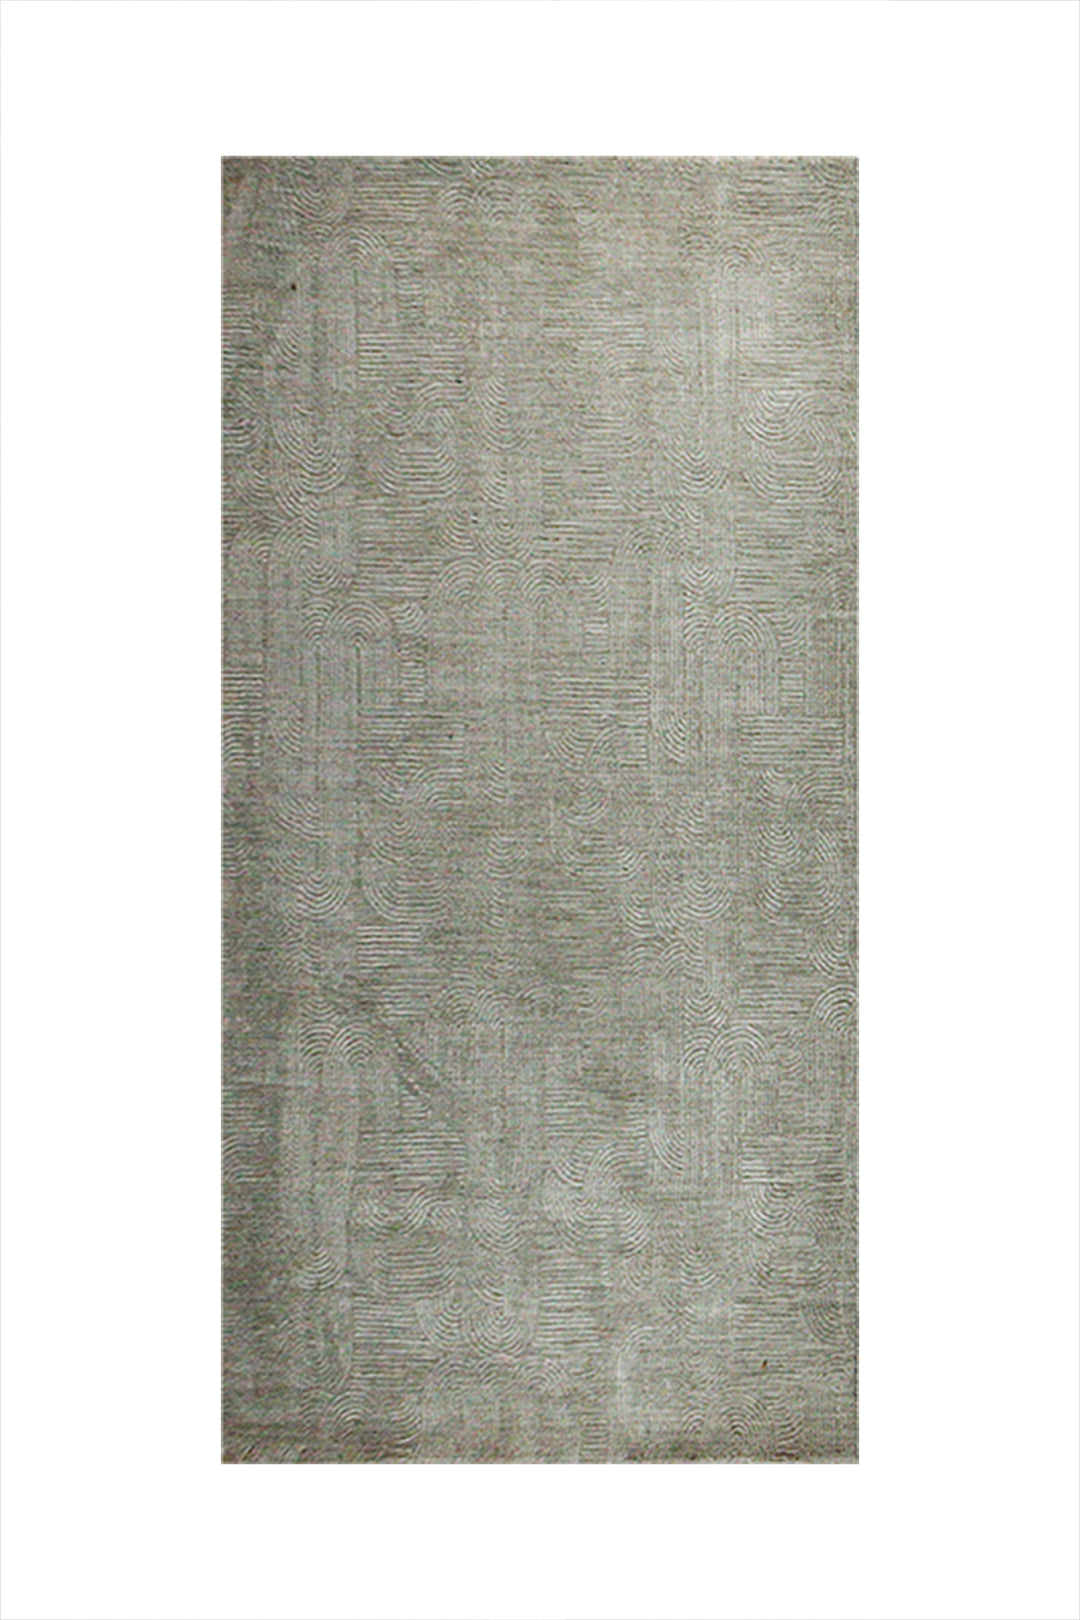 Turkish Modern  Festival 1 Rug - Gray - 6.5 x 9.8 FT - Superior Comfort, Modern Style Accent Rugs